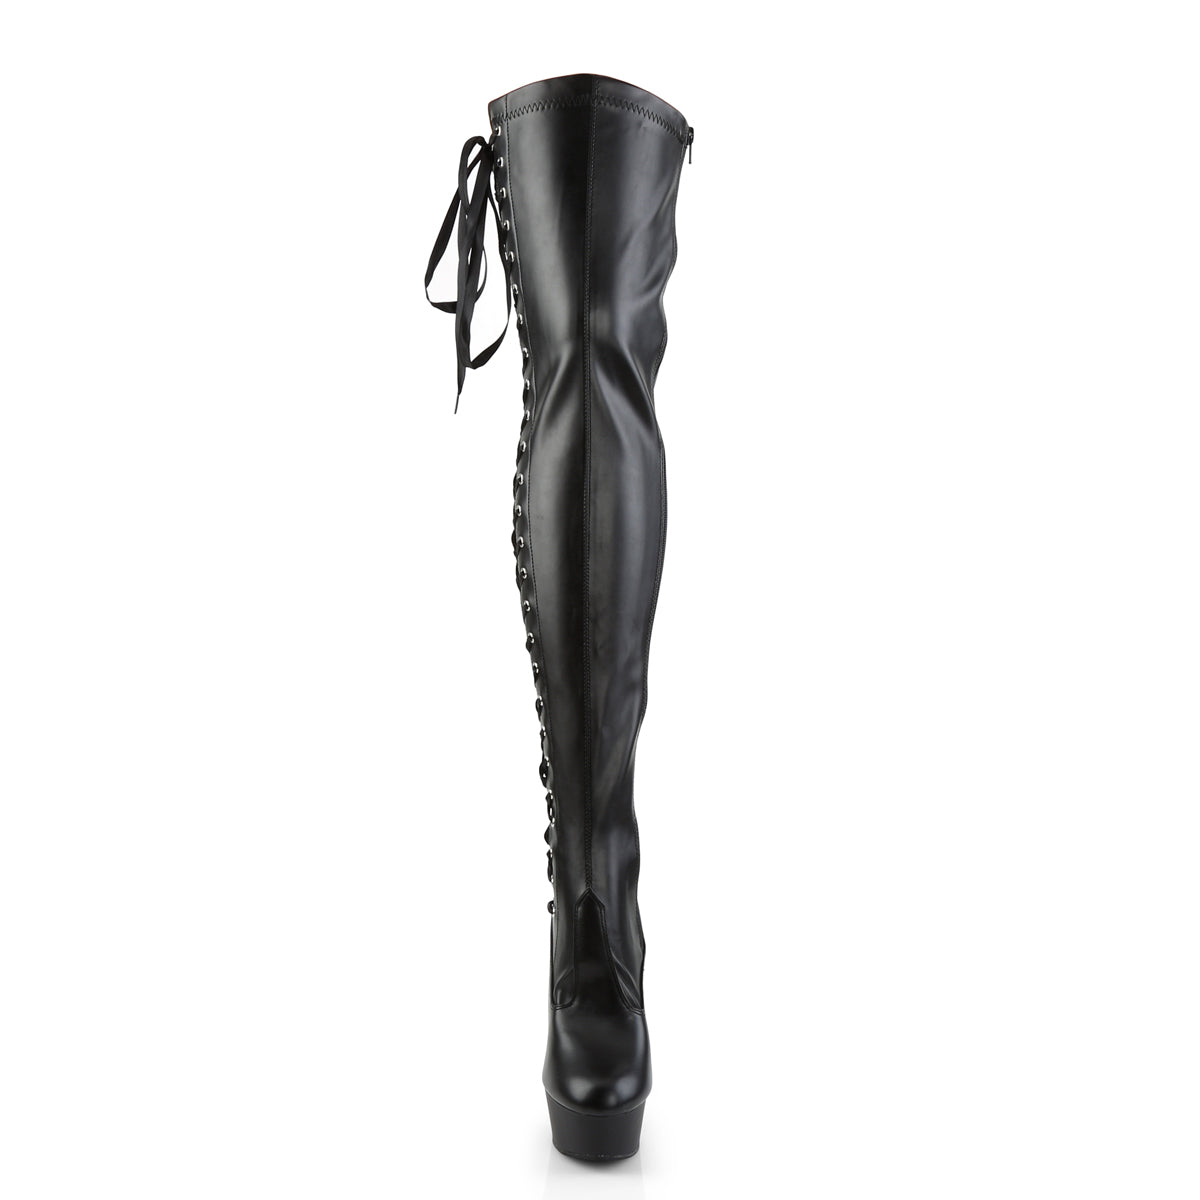 DELIGHT-3050 Black Thigh High Boots